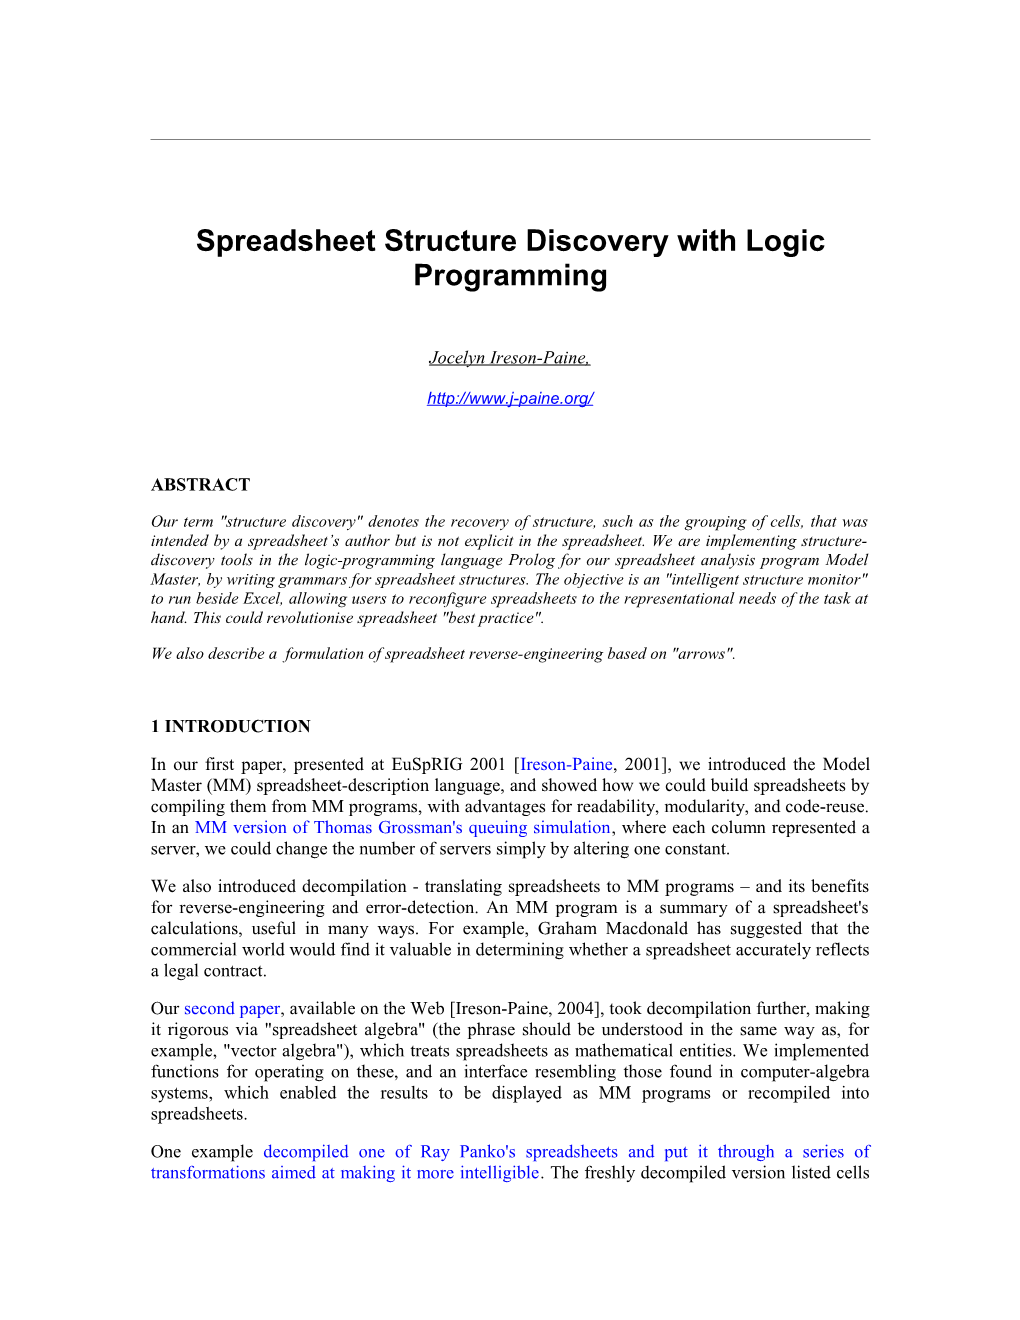 Spreadsheet Structure Discovery with Logic Programming